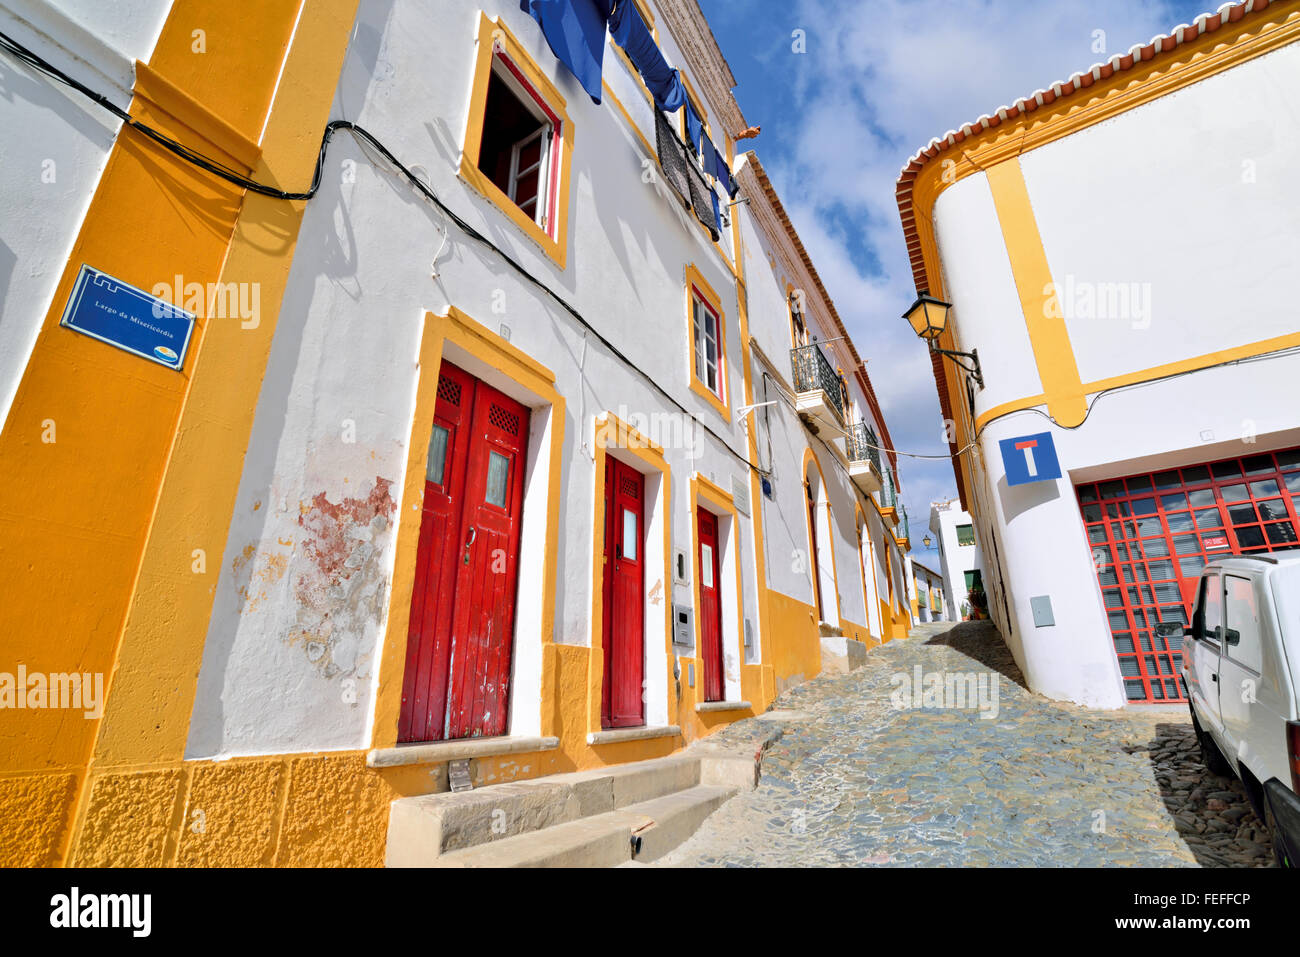 Portugal, Alentejo: Typical alley and traditional buildings in the historic village Mértola Stock Photo